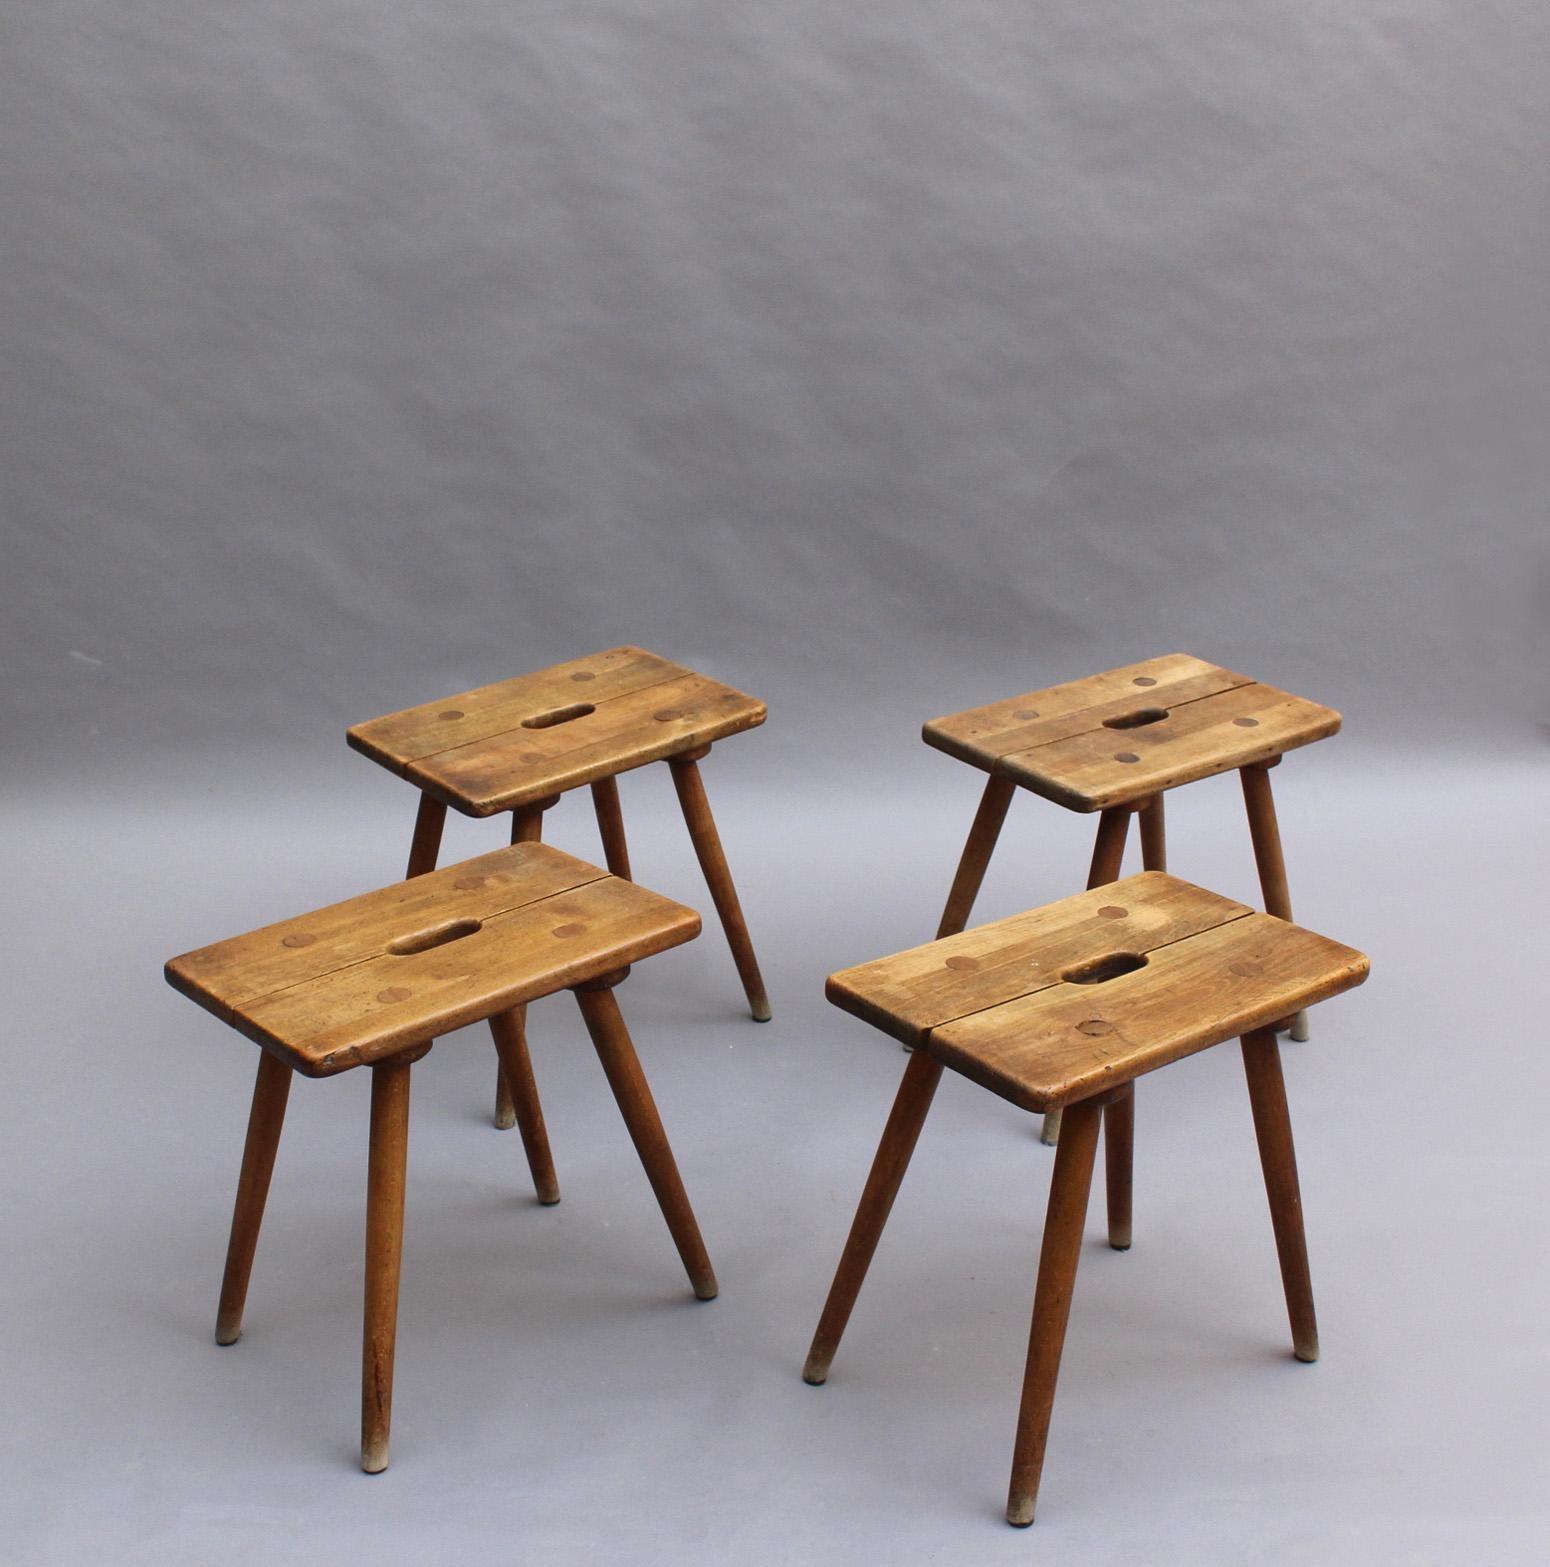 Four French Mid-Century beech wood stools or occasional tables.